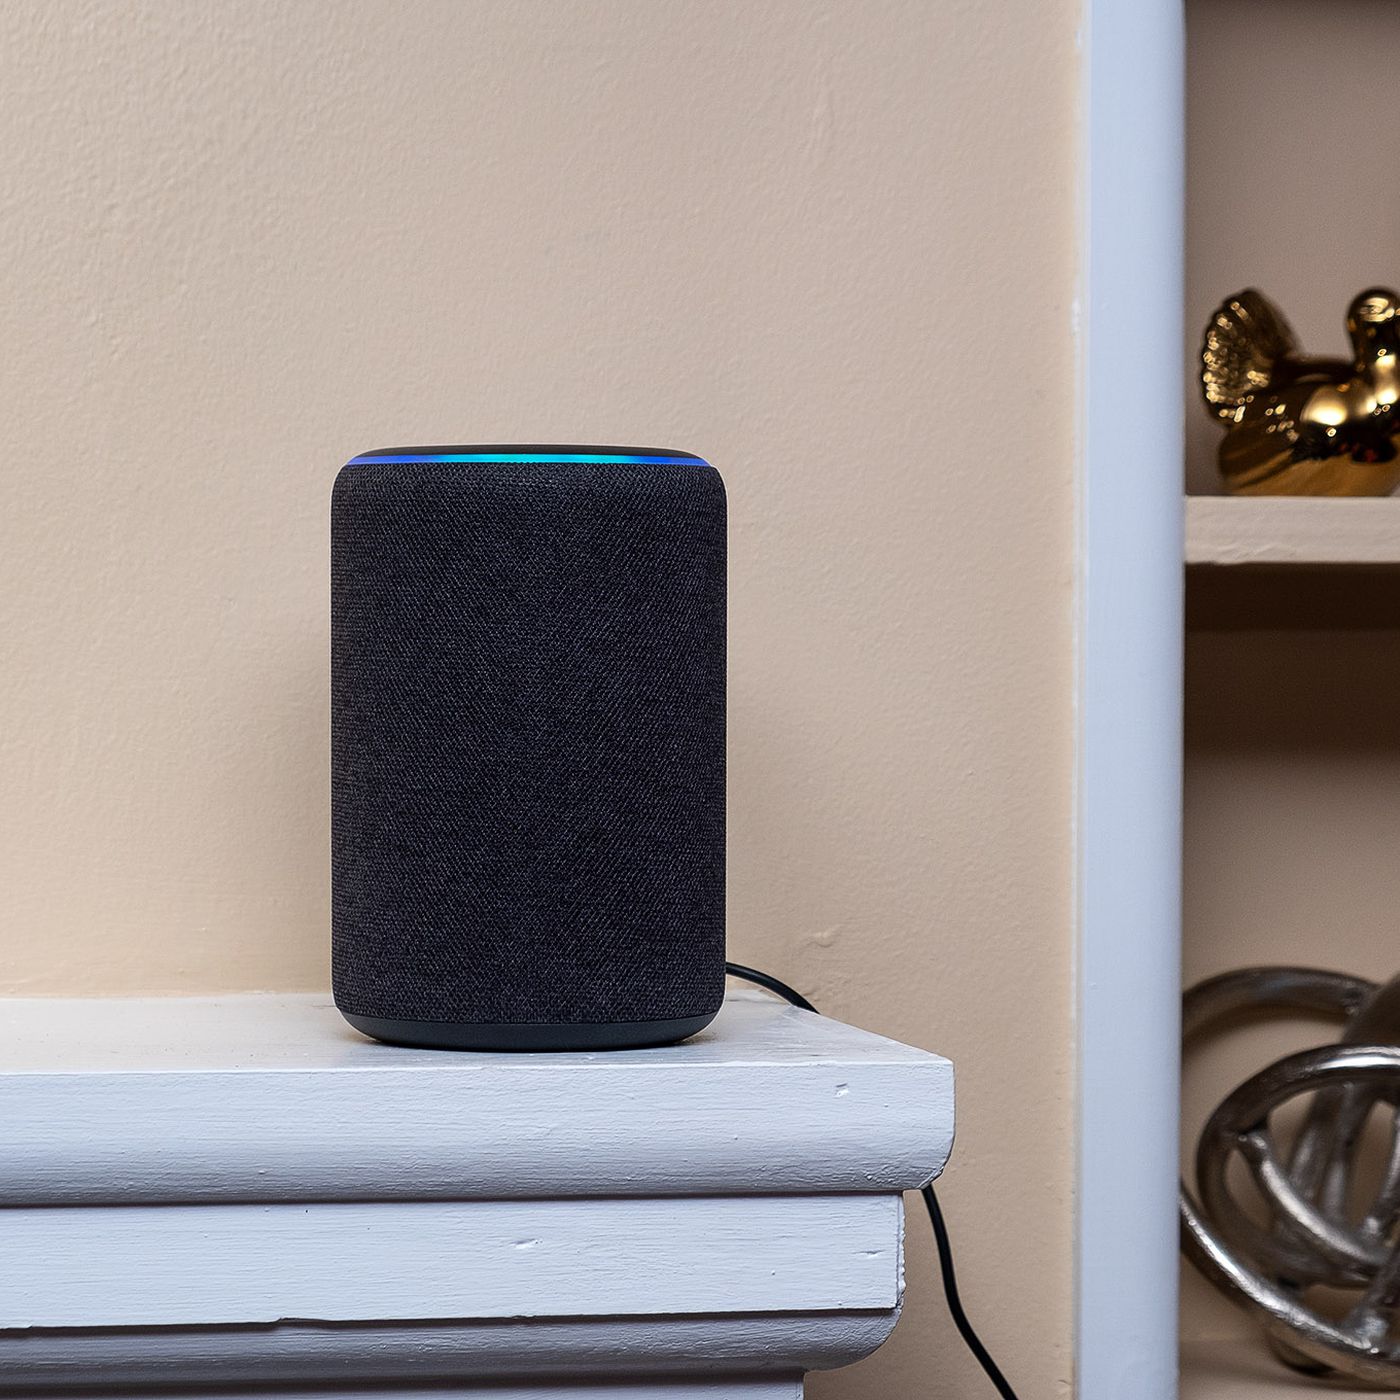 Alexa S New Song Id Feature Will Tell You What Song Is Playing